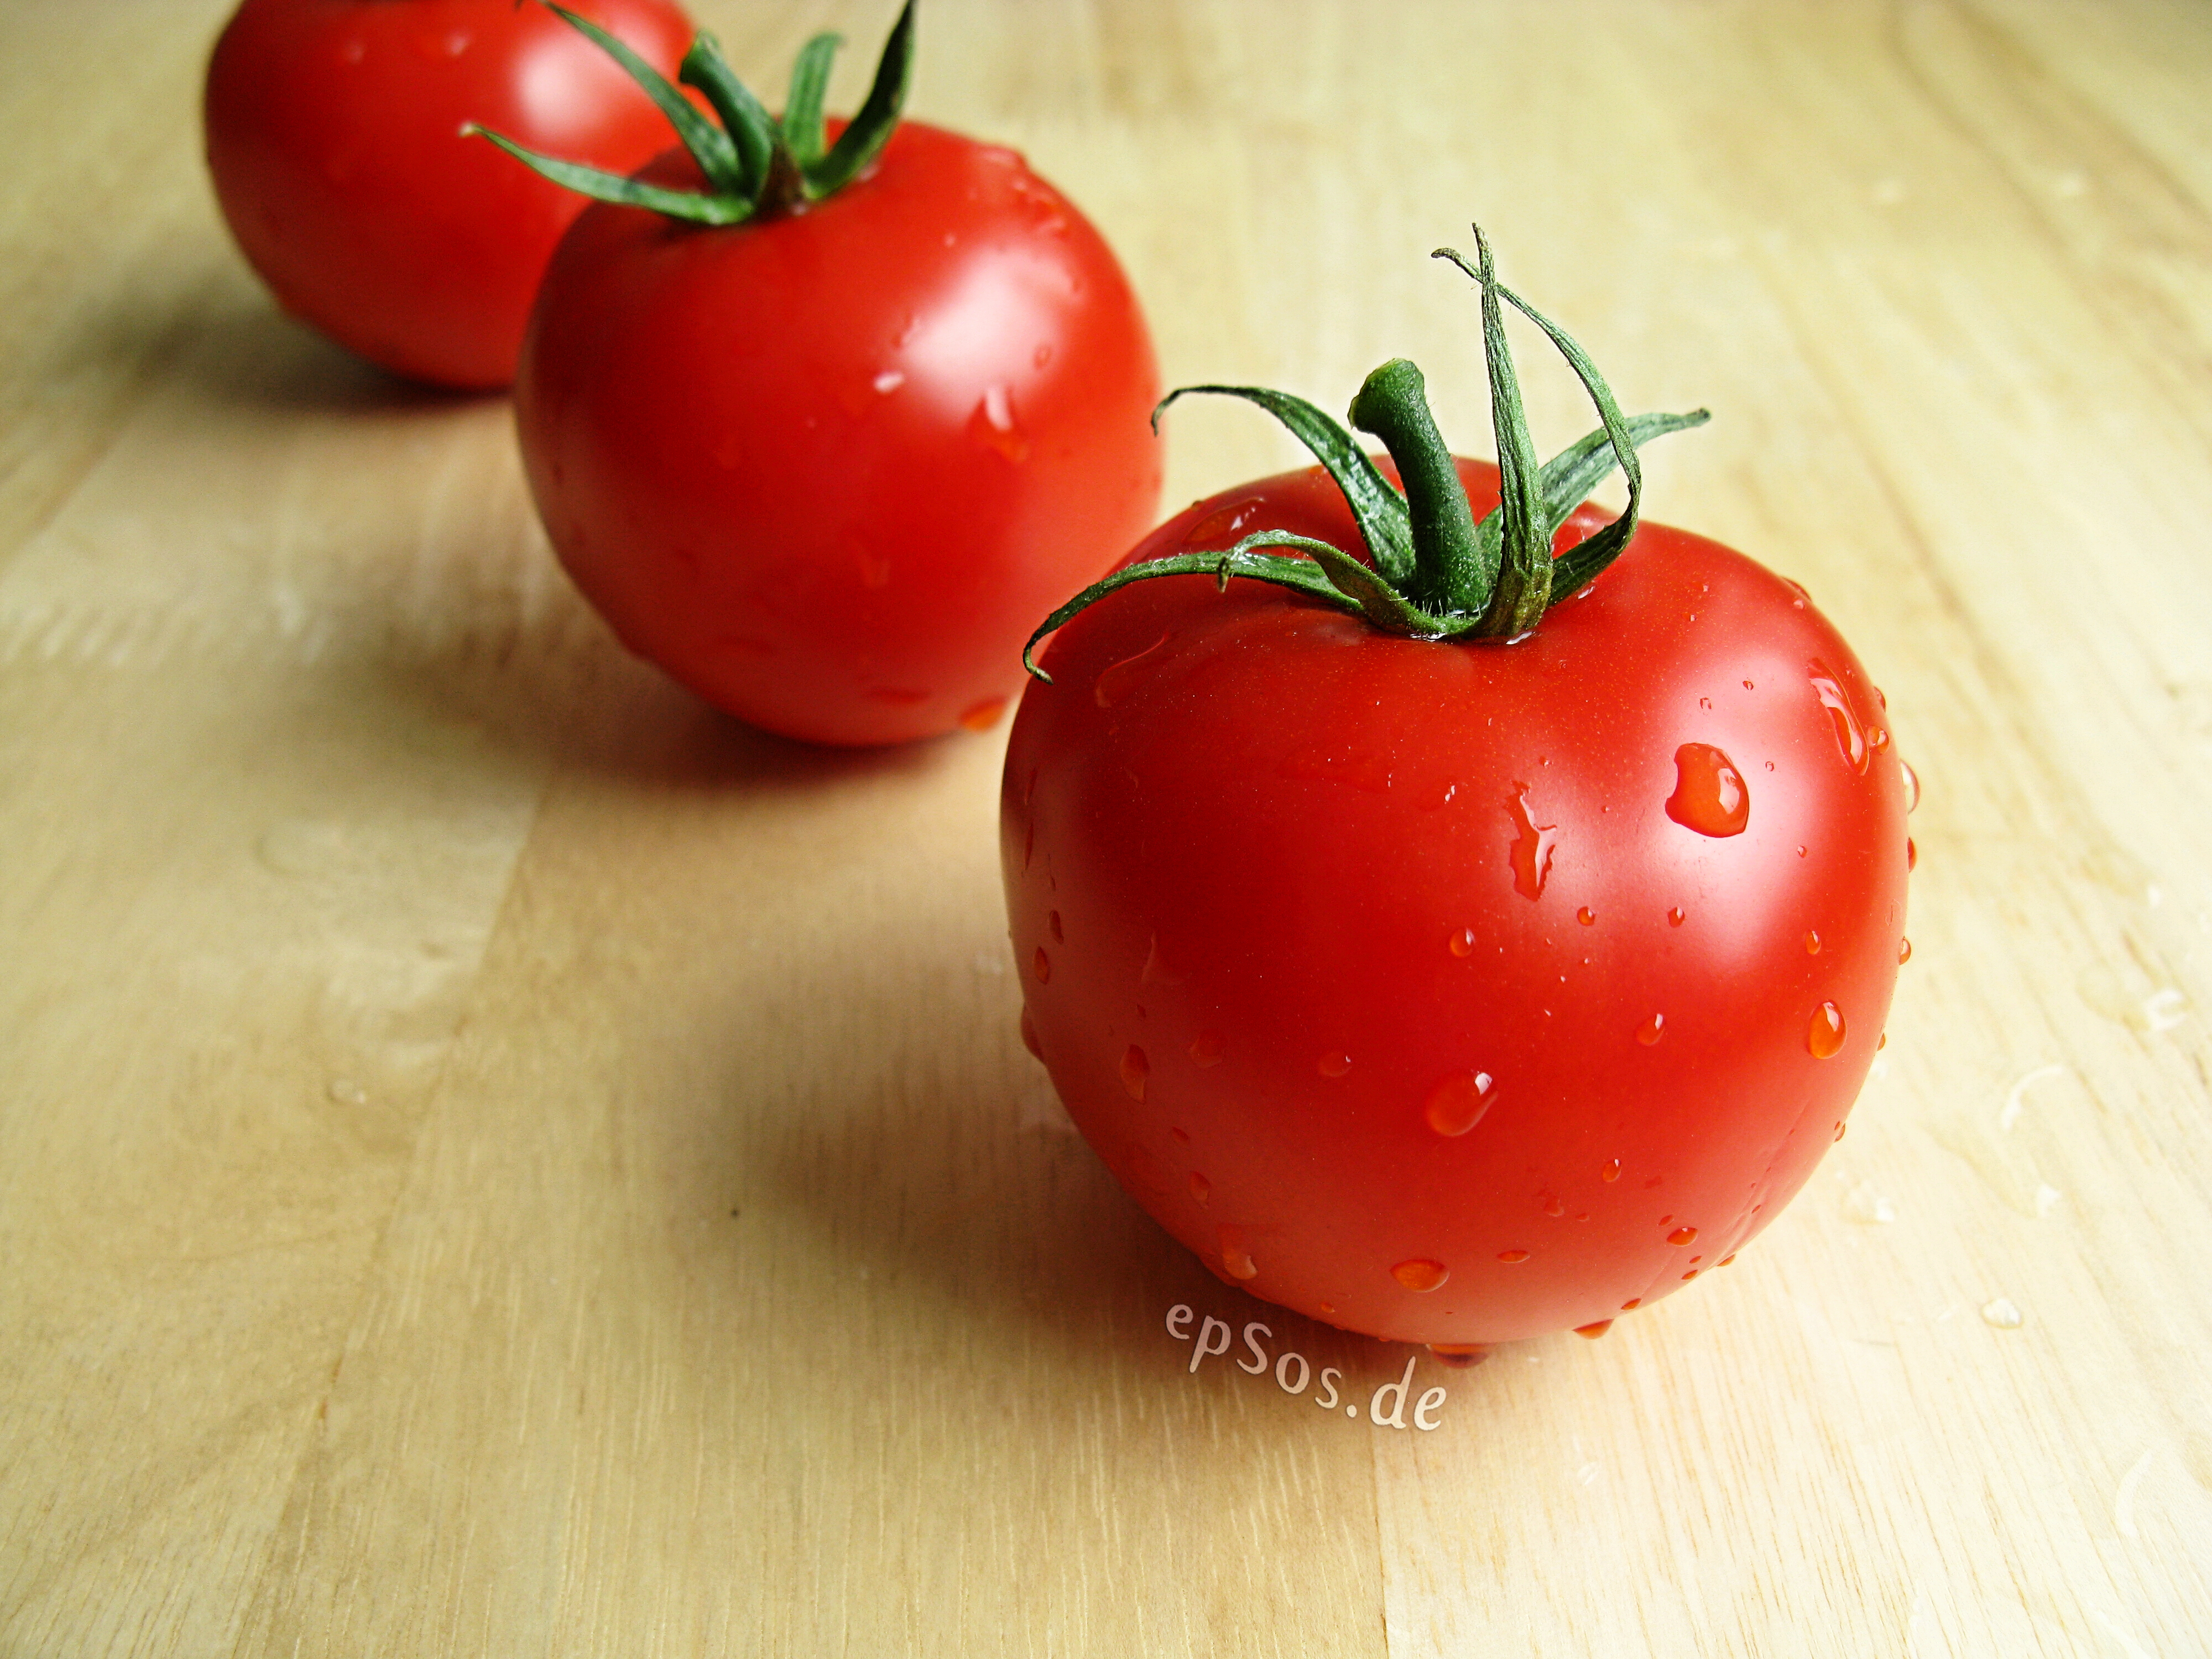 File:Healthy Red Tomatoes with Water Drops.jpg - Wikimedia Commons